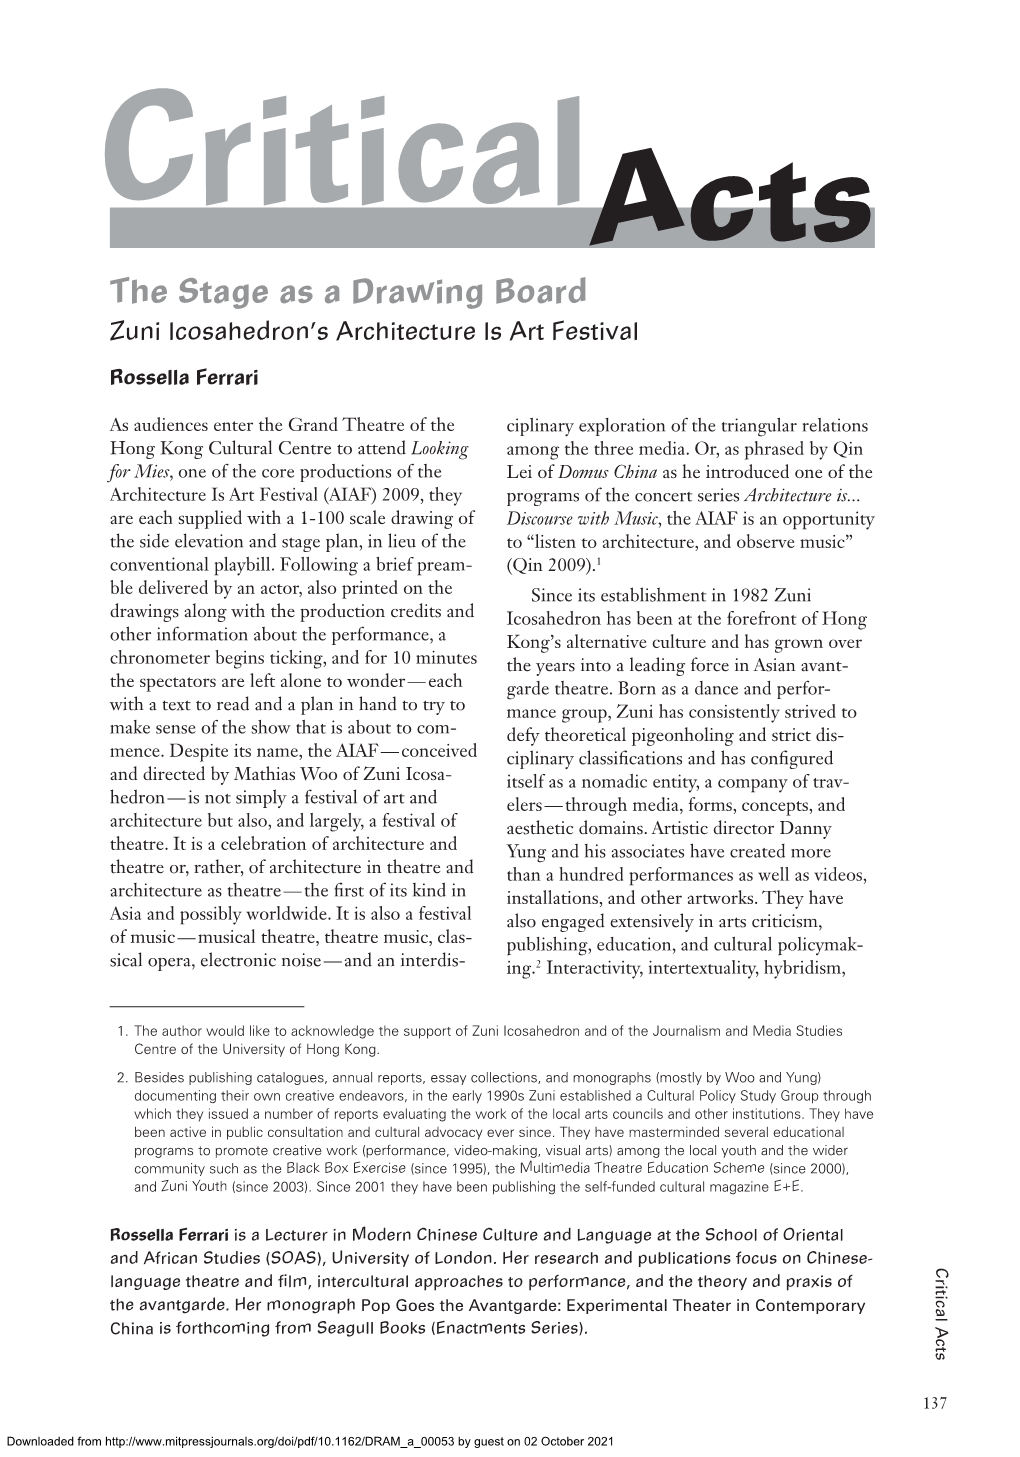 The Stage As a Drawing Board